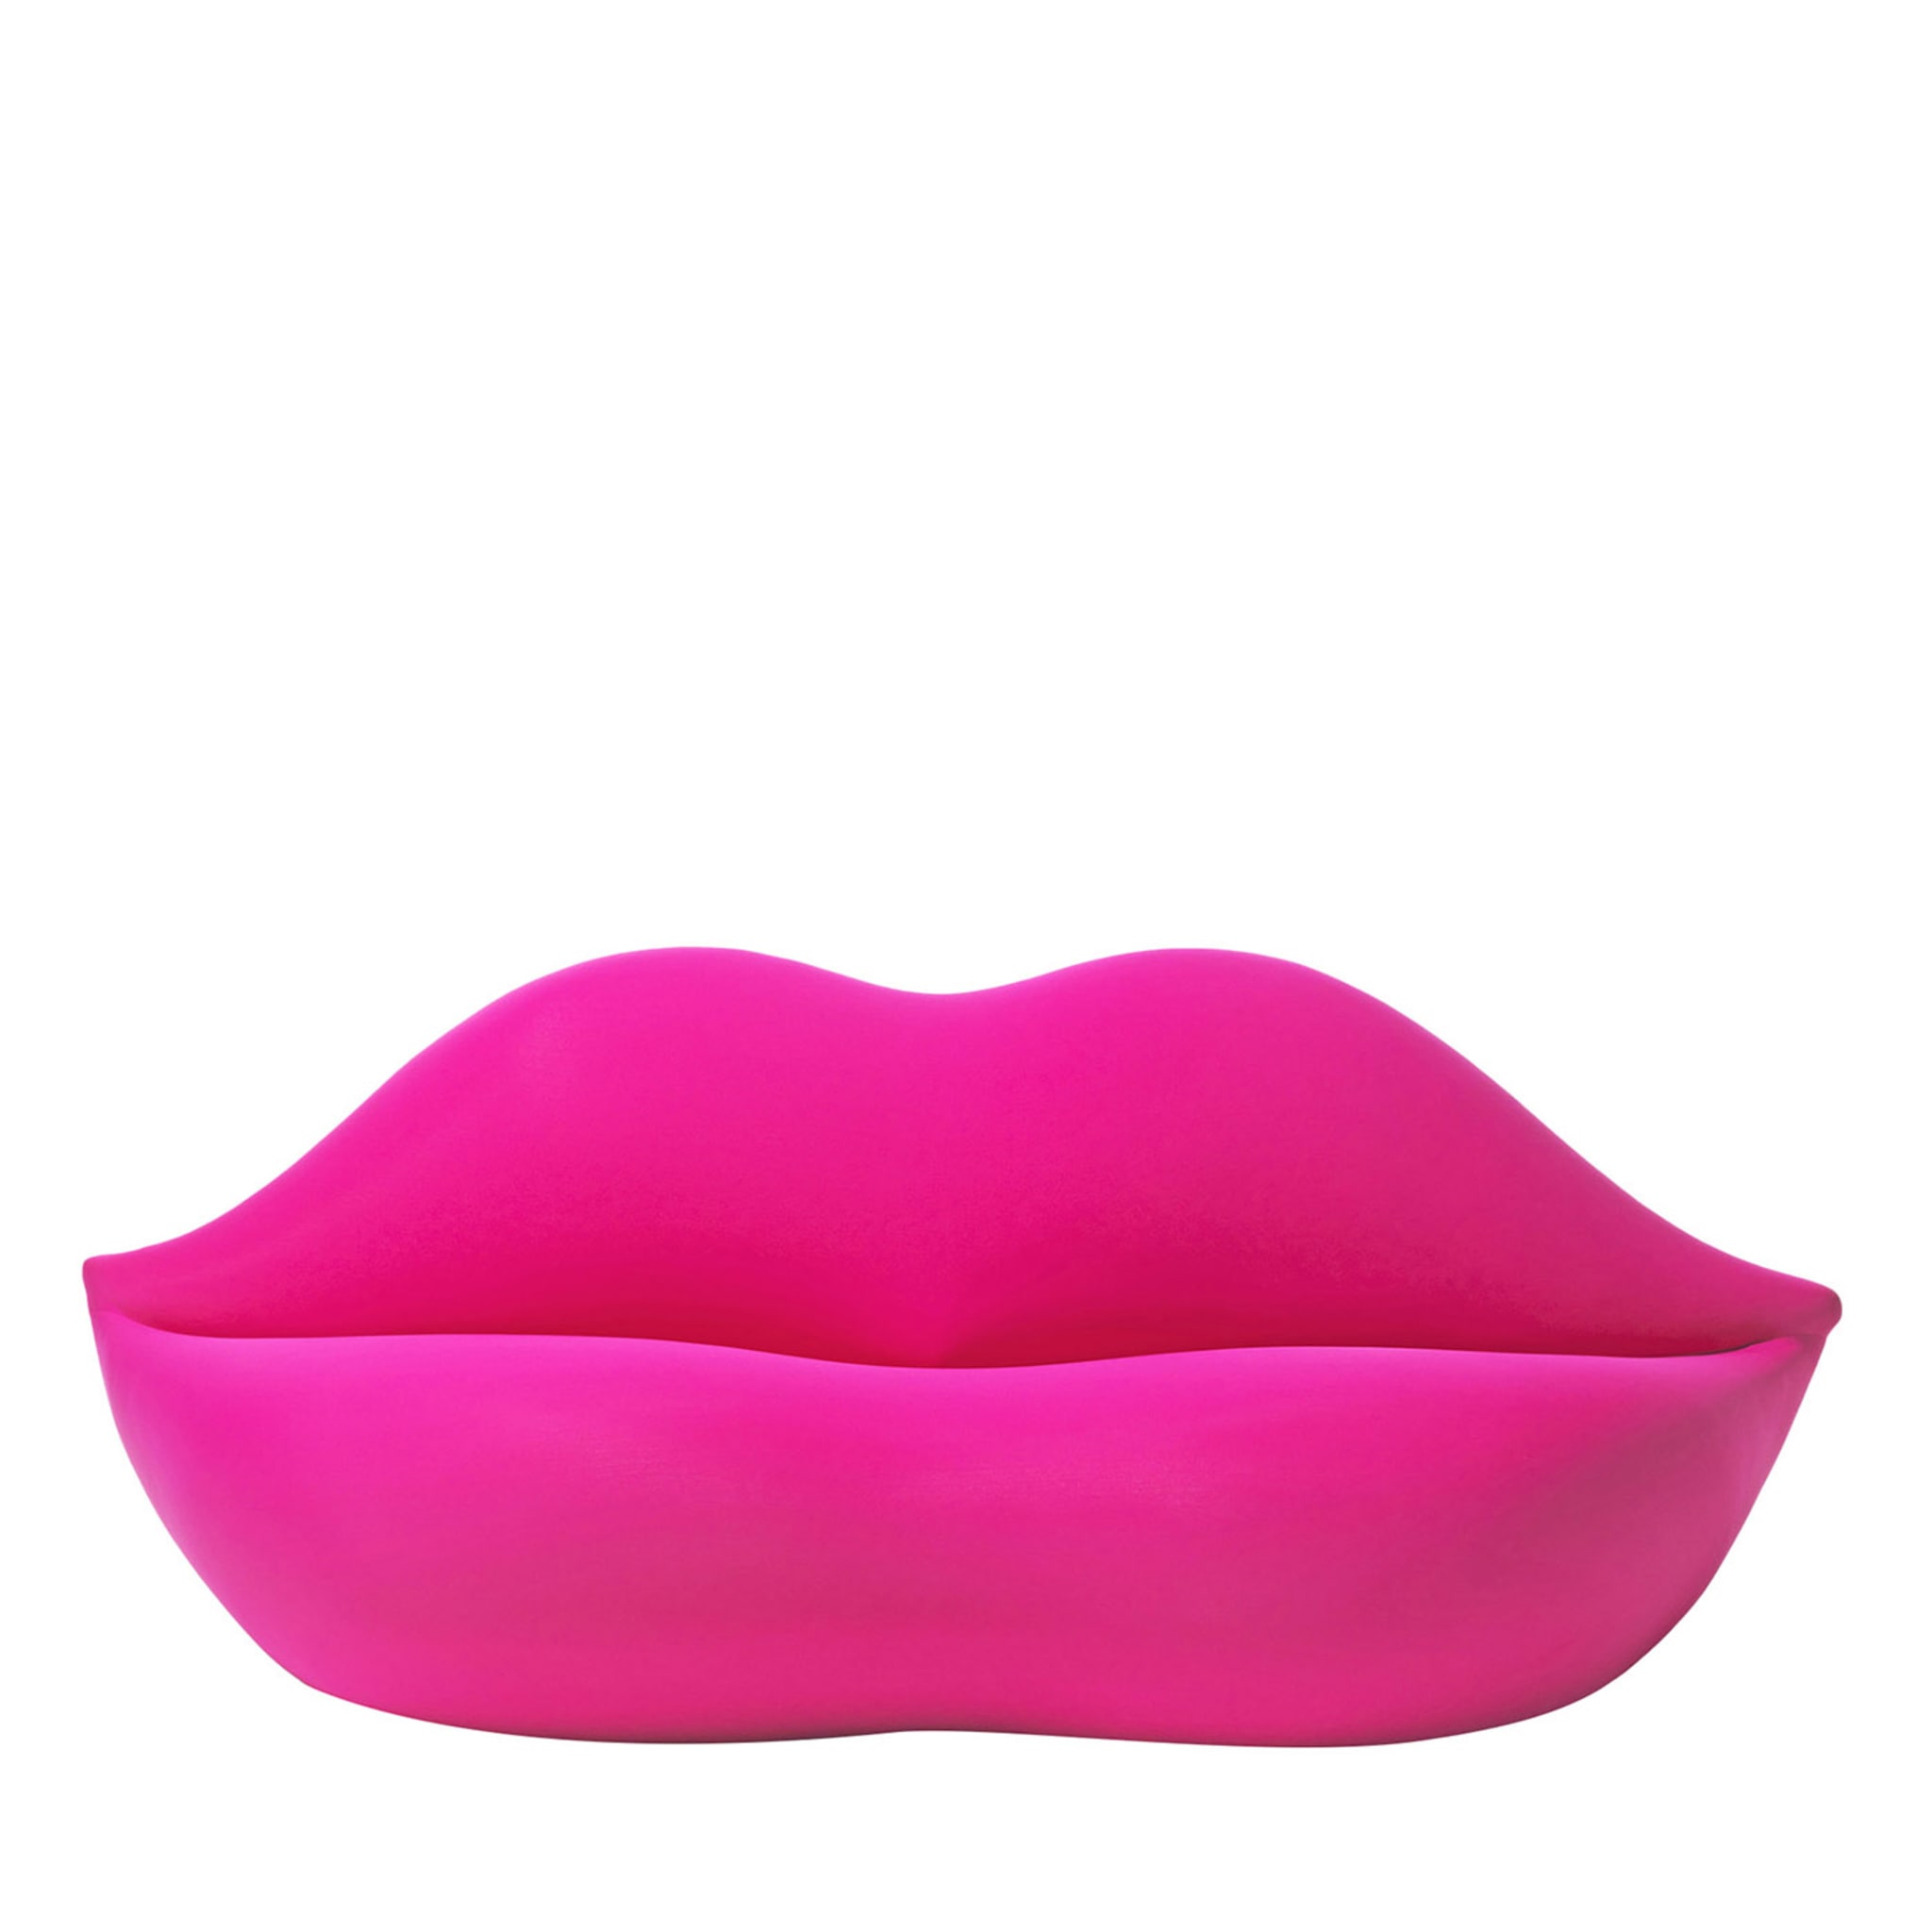 Bocca Pink Lady Limited Edition Sofa by Studio 65 - Main view